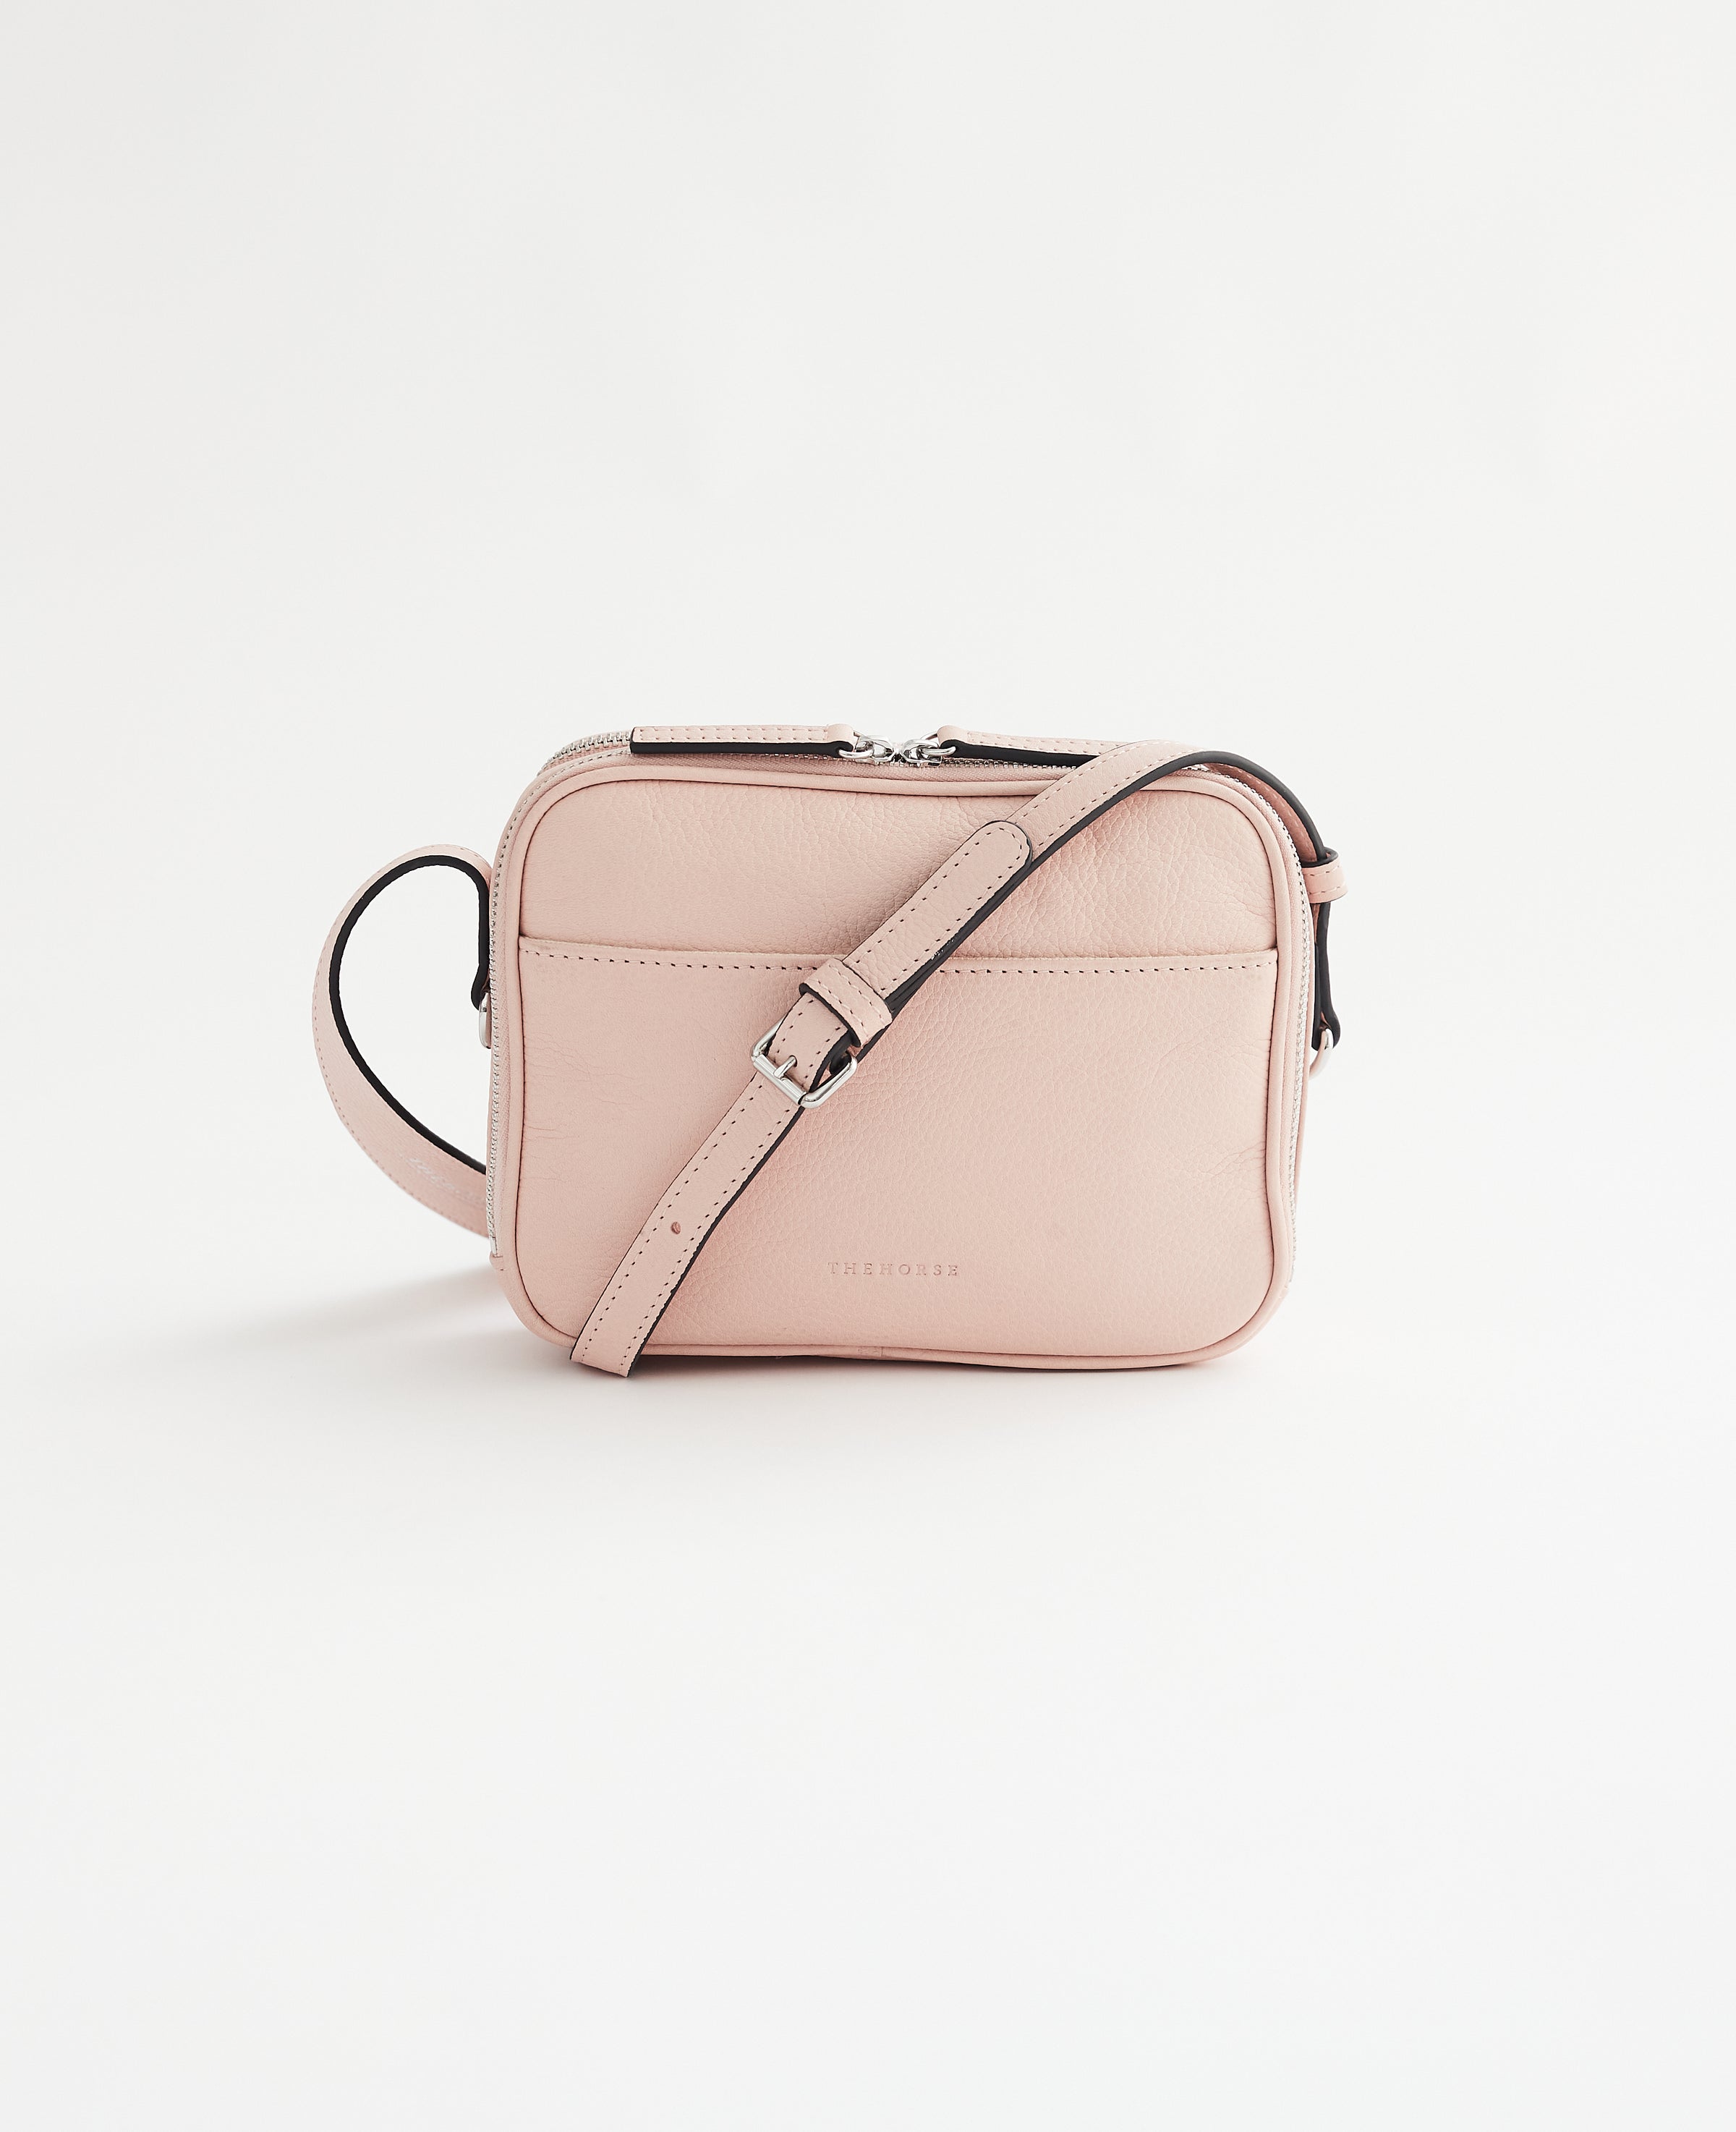 Dylan Leather Double Zip Cross Body Bag in Pink by The Horse®